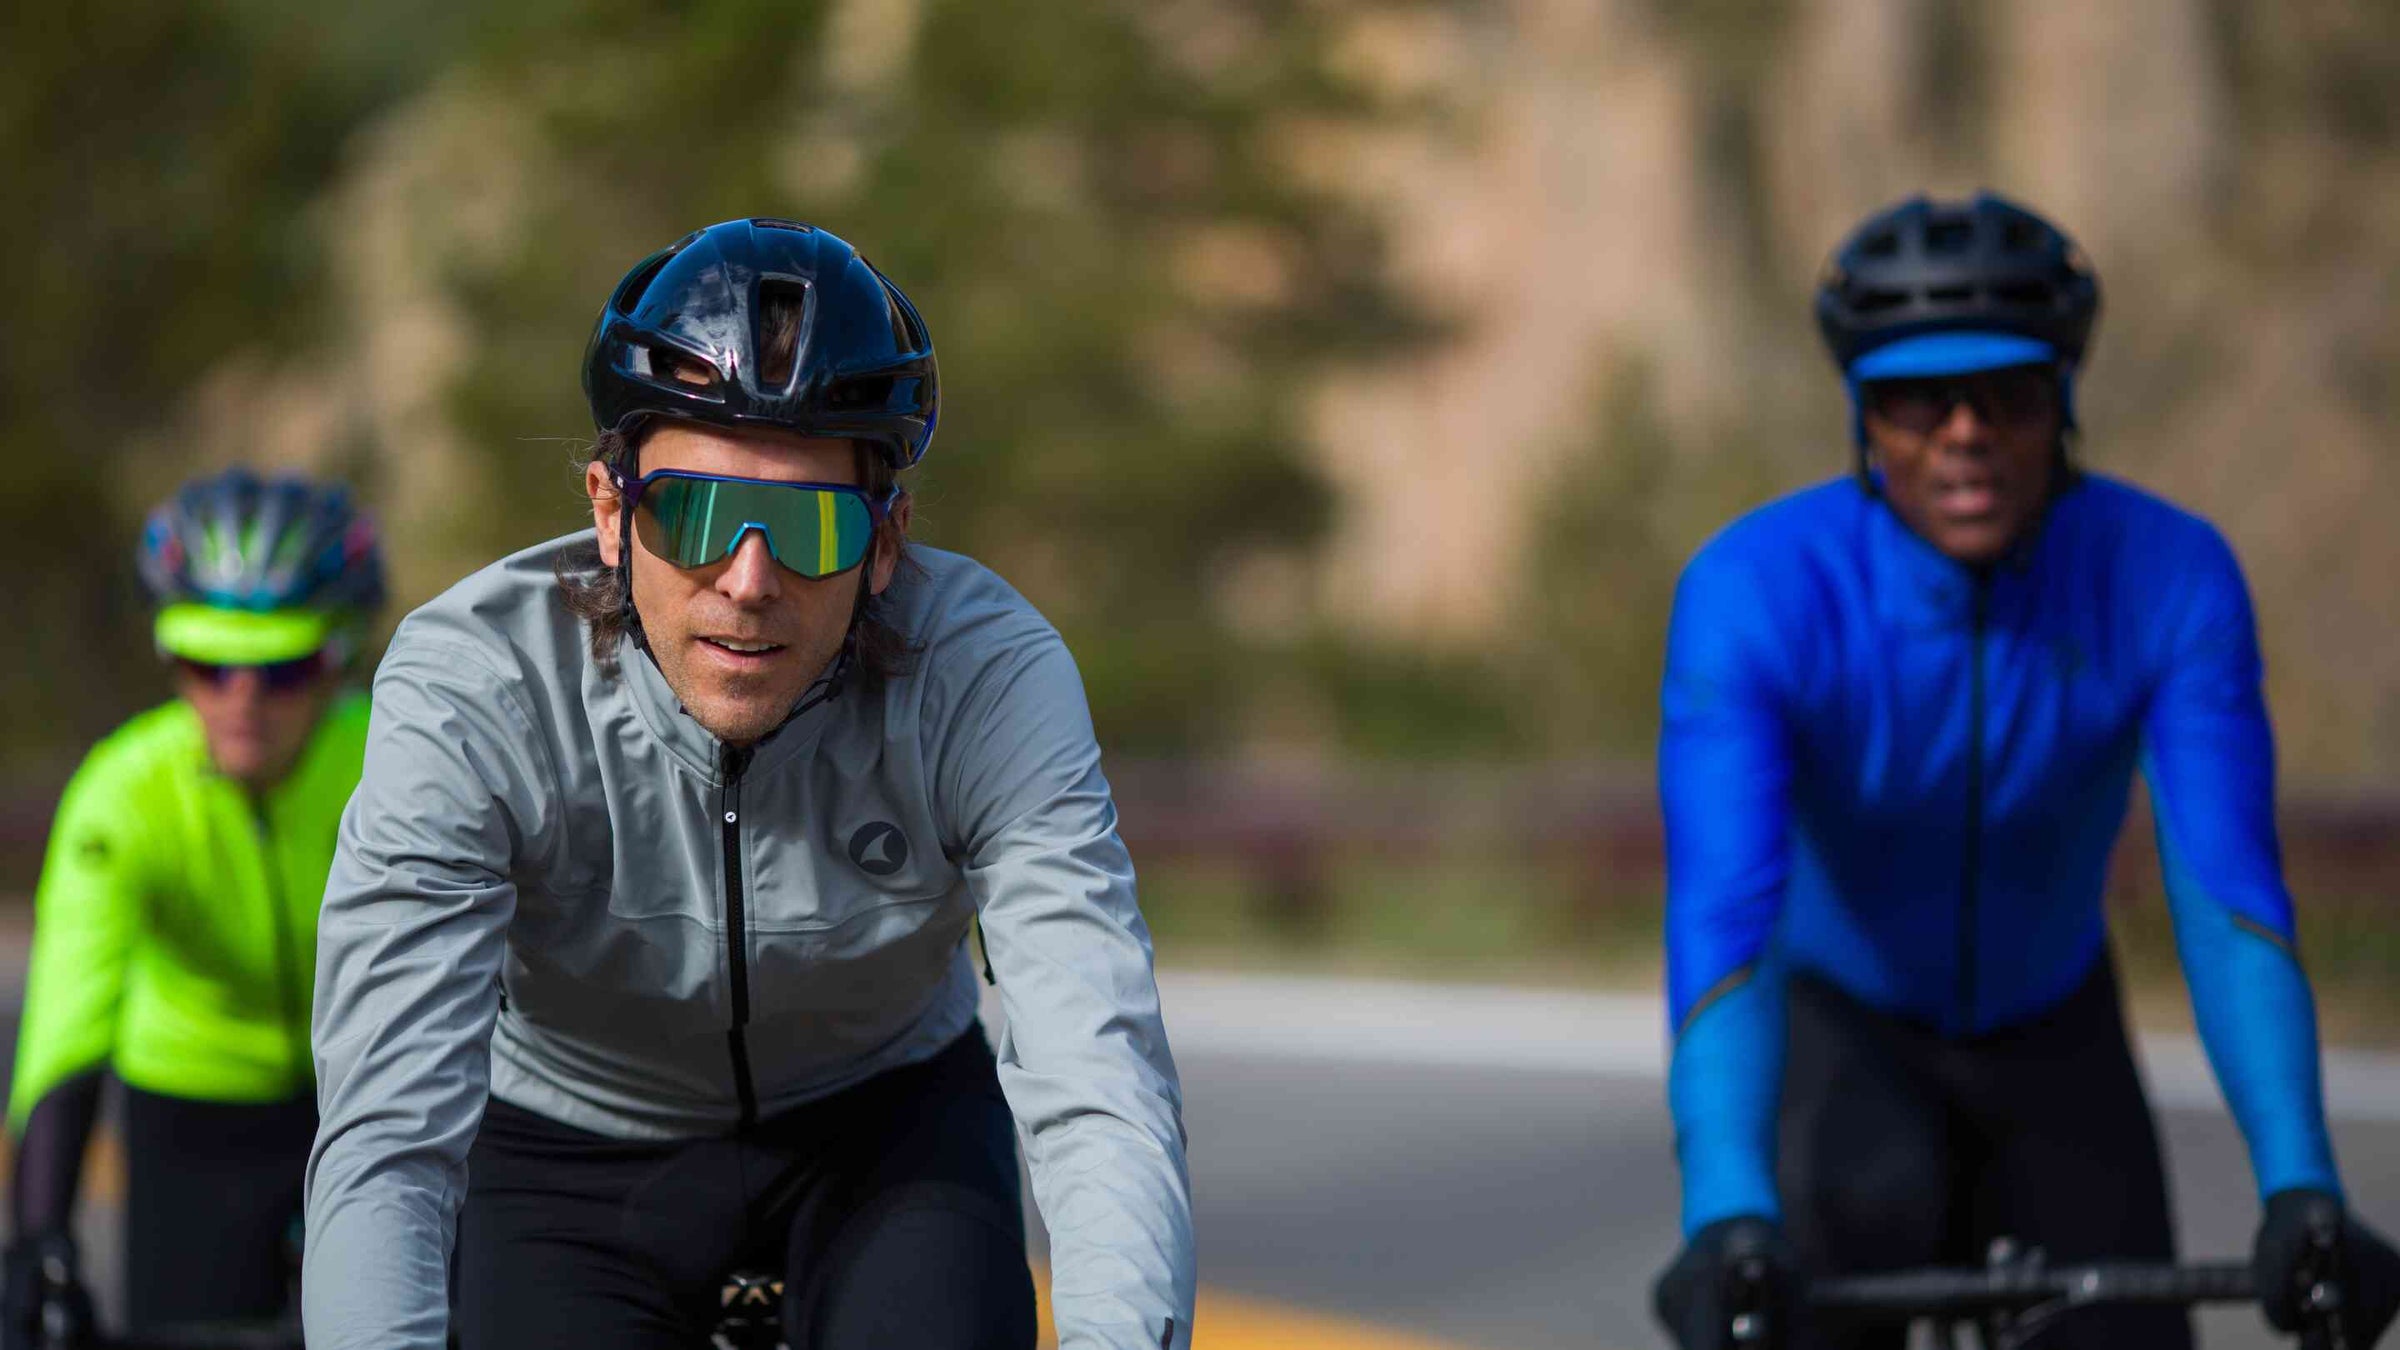 Pactimo Men's Featured Cycling Clothing